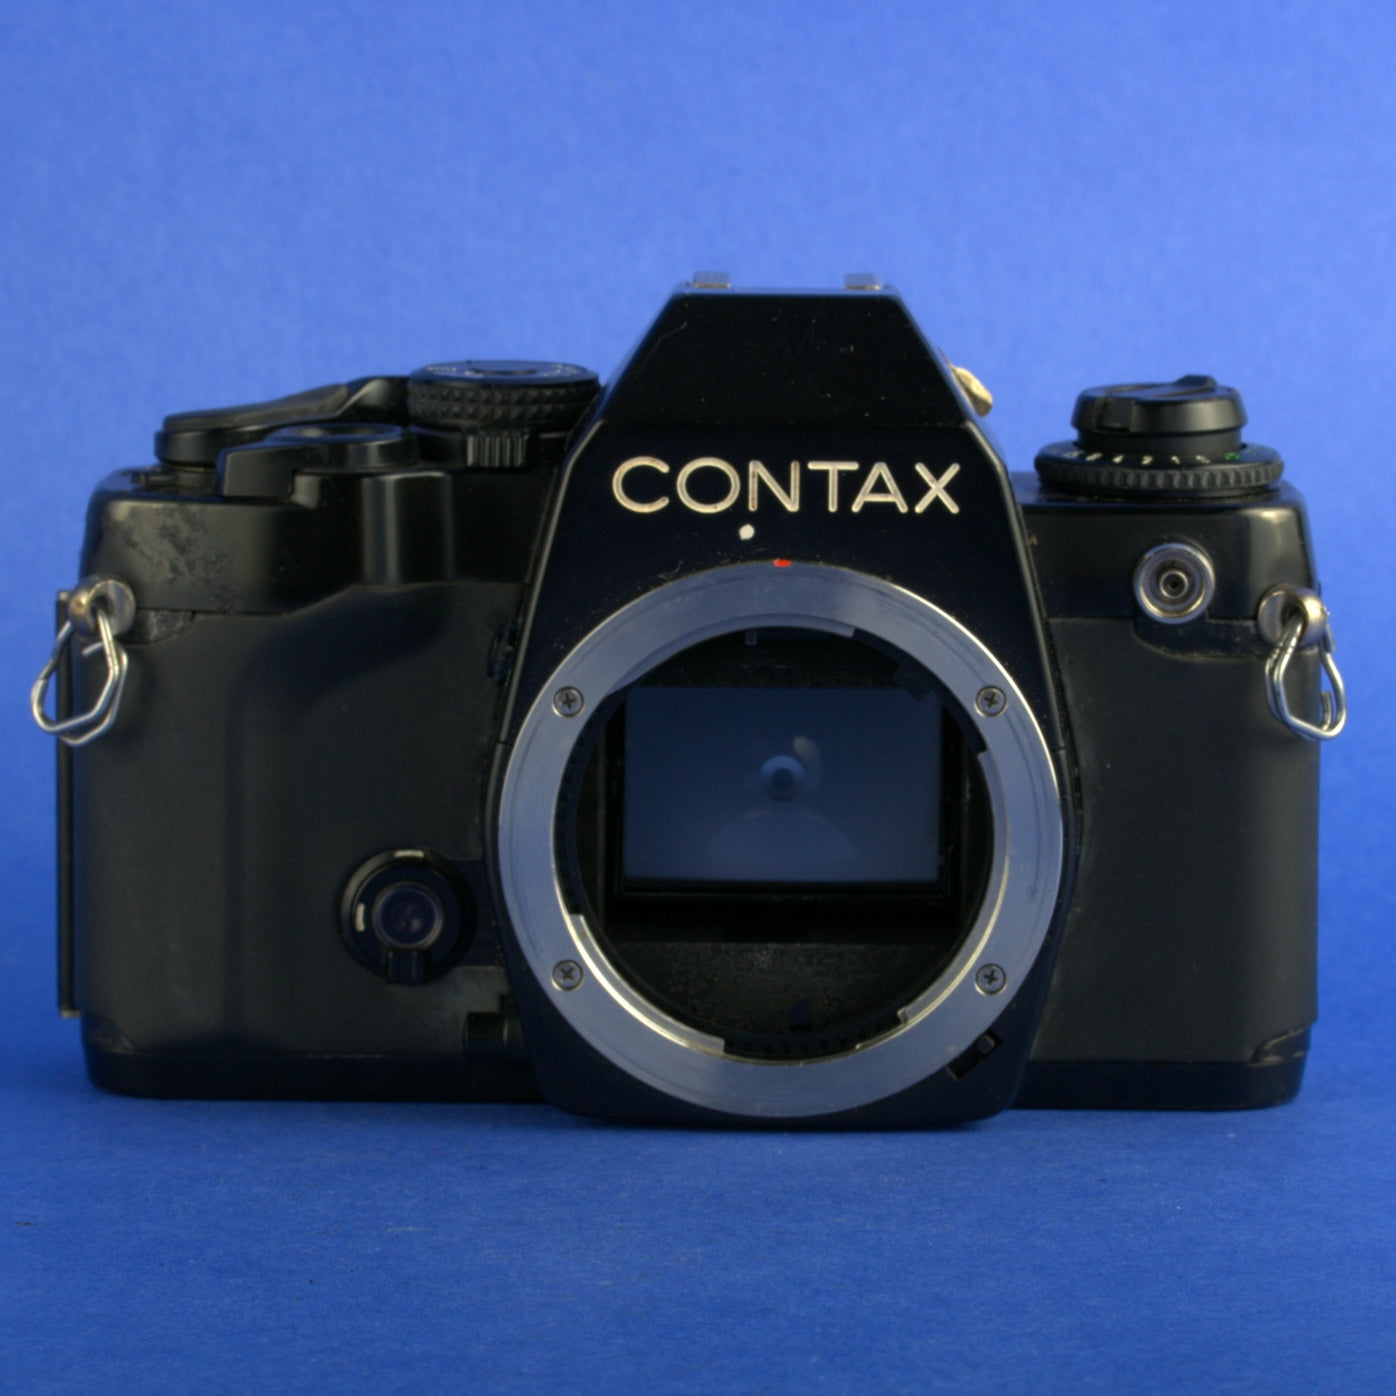 Contax 159MM Film Camera Body Not Working